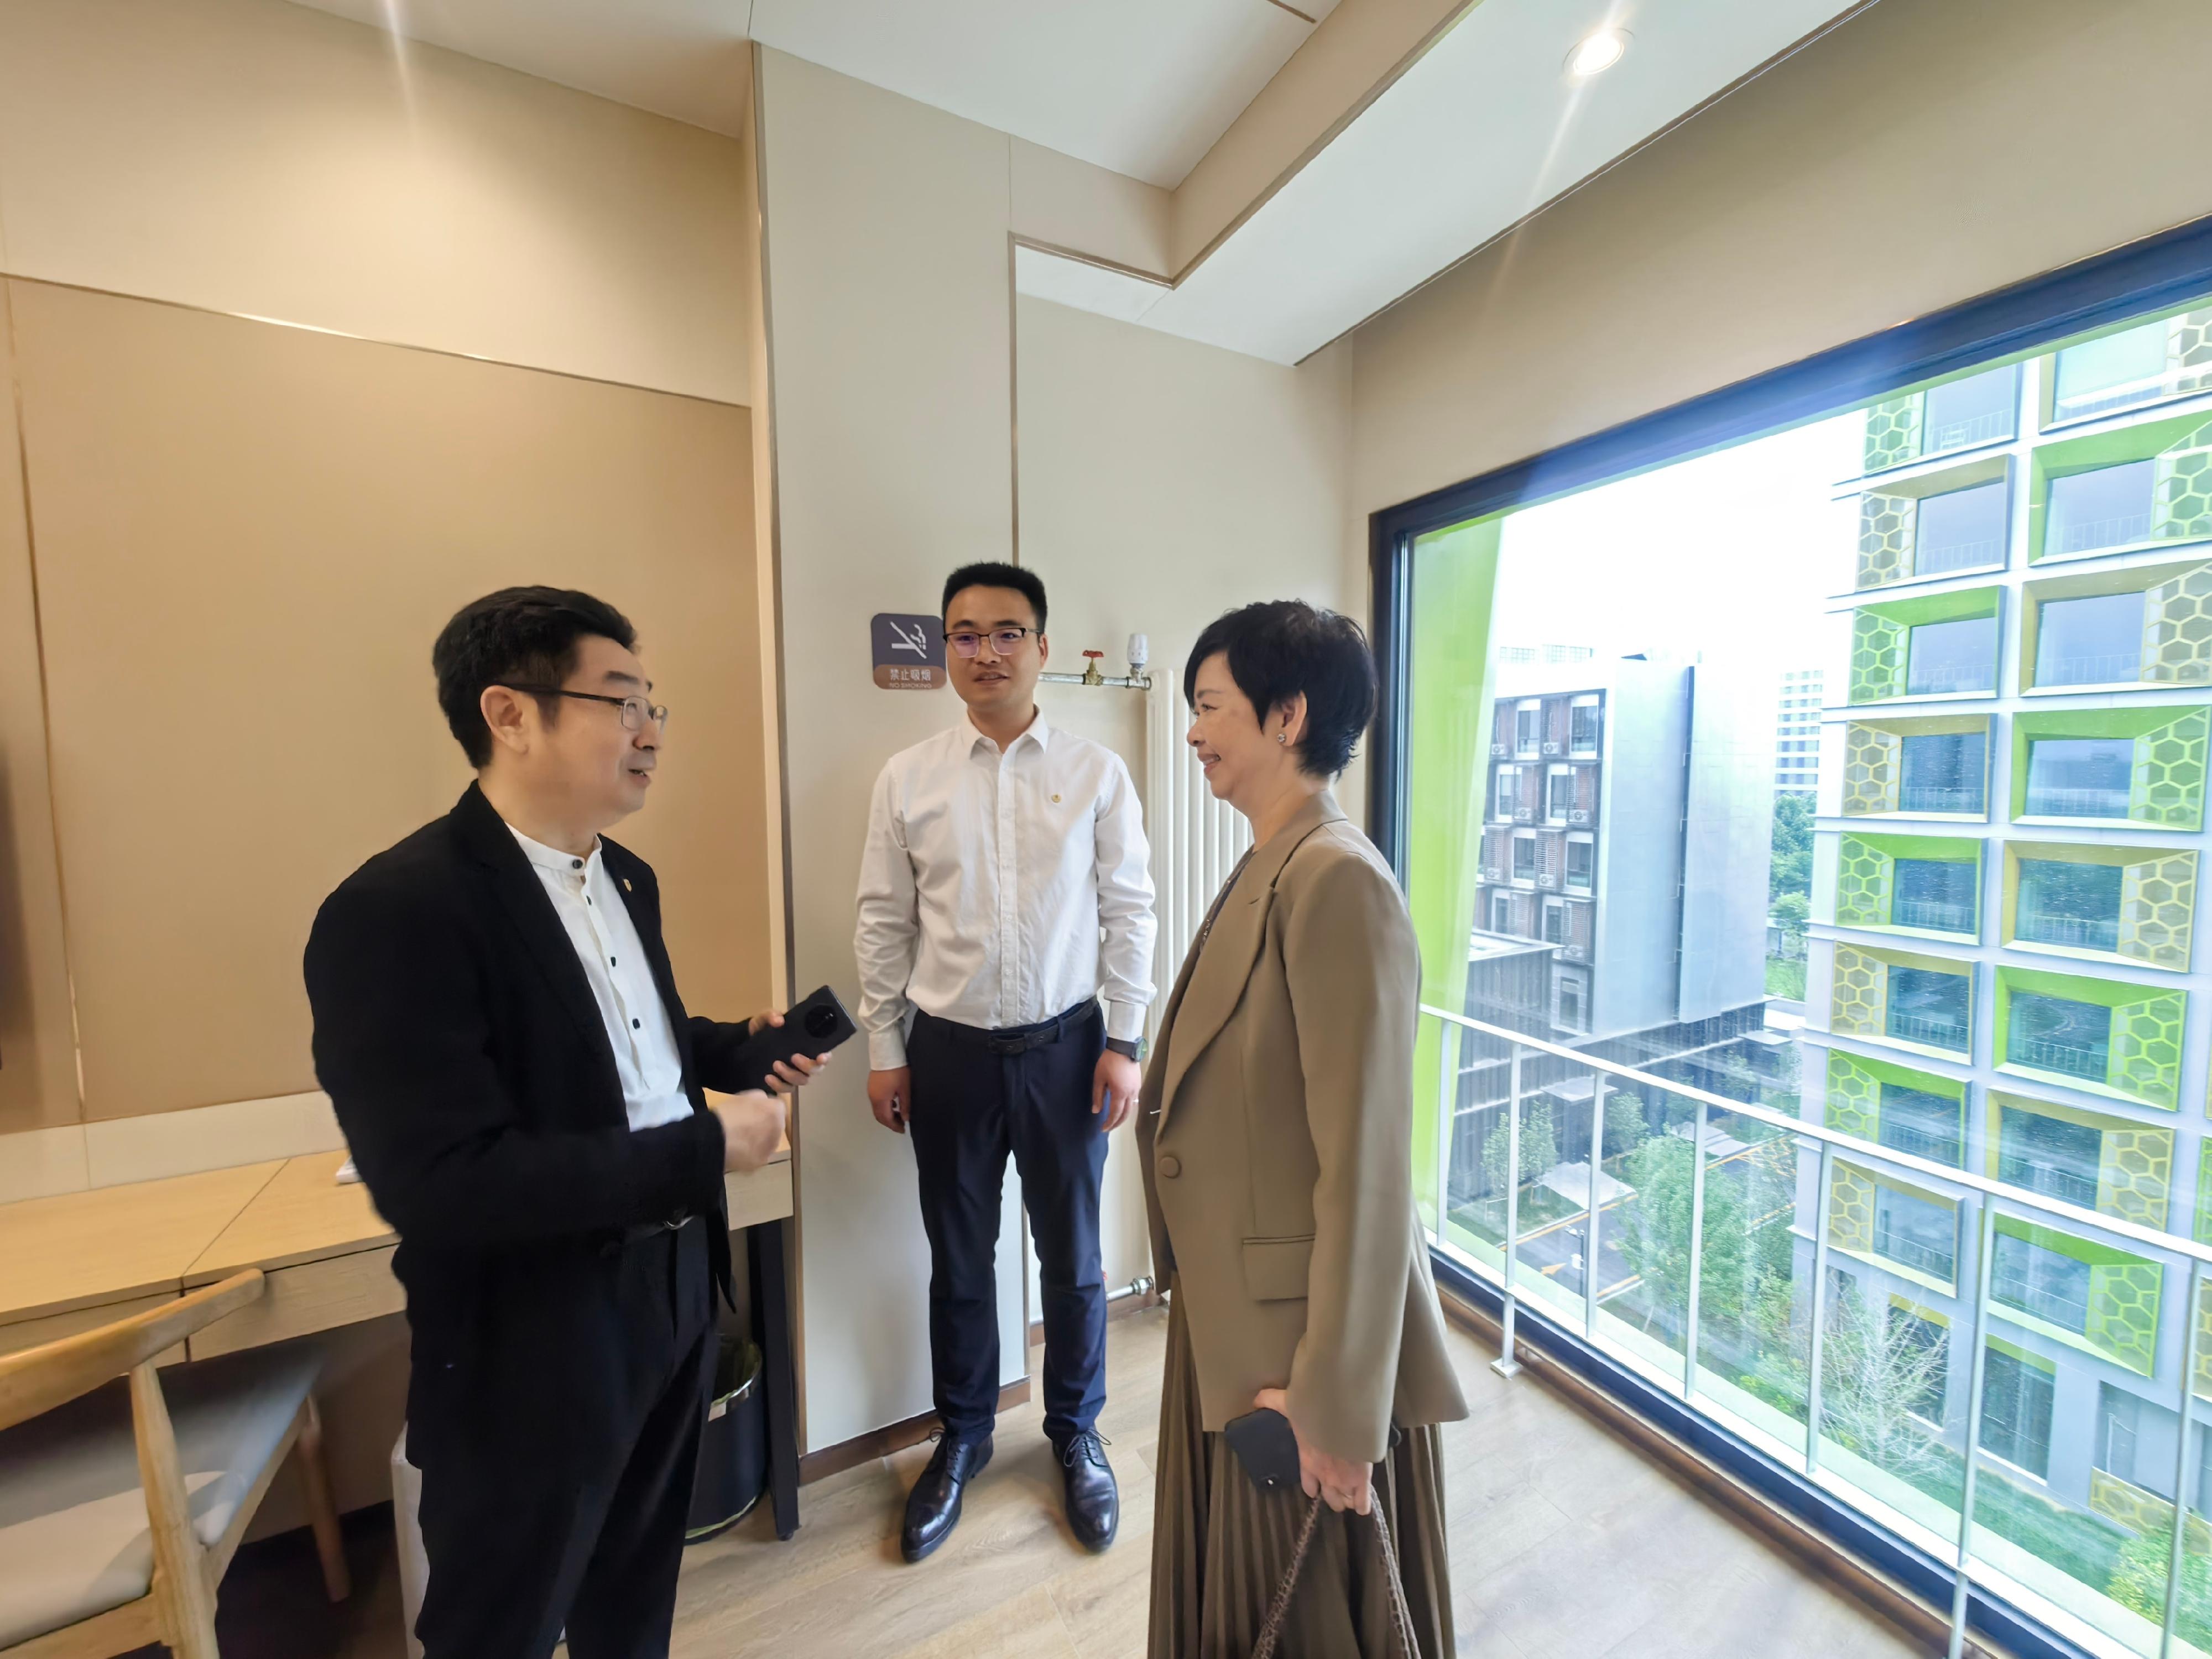 The Secretary for Housing, Ms Winnie Ho, was on the second day of her visit to Beijing today (May 31). Photo shows Ms Ho (right) touring the Yizhuang Blue Collar Apartment Project to learn about the use of the Modular Integrated Construction method in building high-rise buildings expeditiously, which increases the quality of work and shortens the construction time.